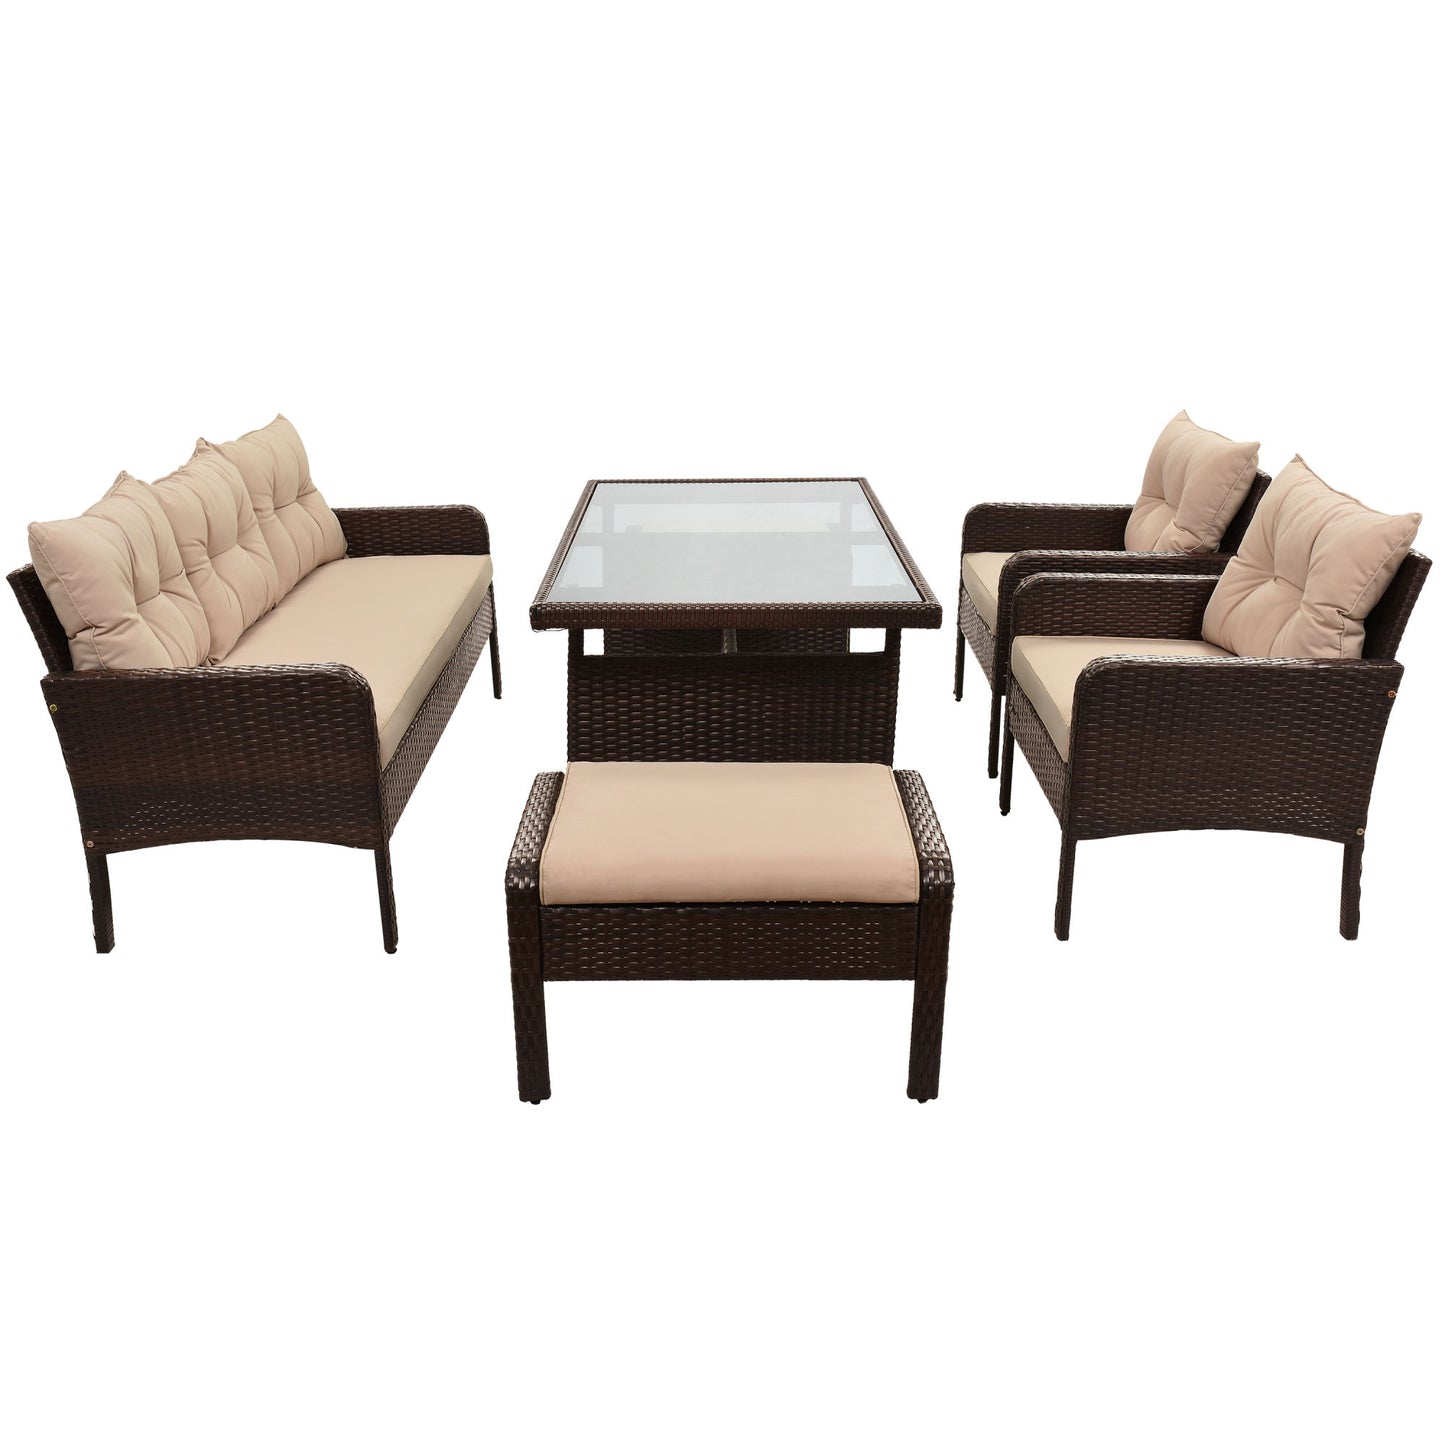 6-Piece Outdoor Wicker Rattan Sofa Set Dining Table Set with Removable Cushions and Tempered Glass Table